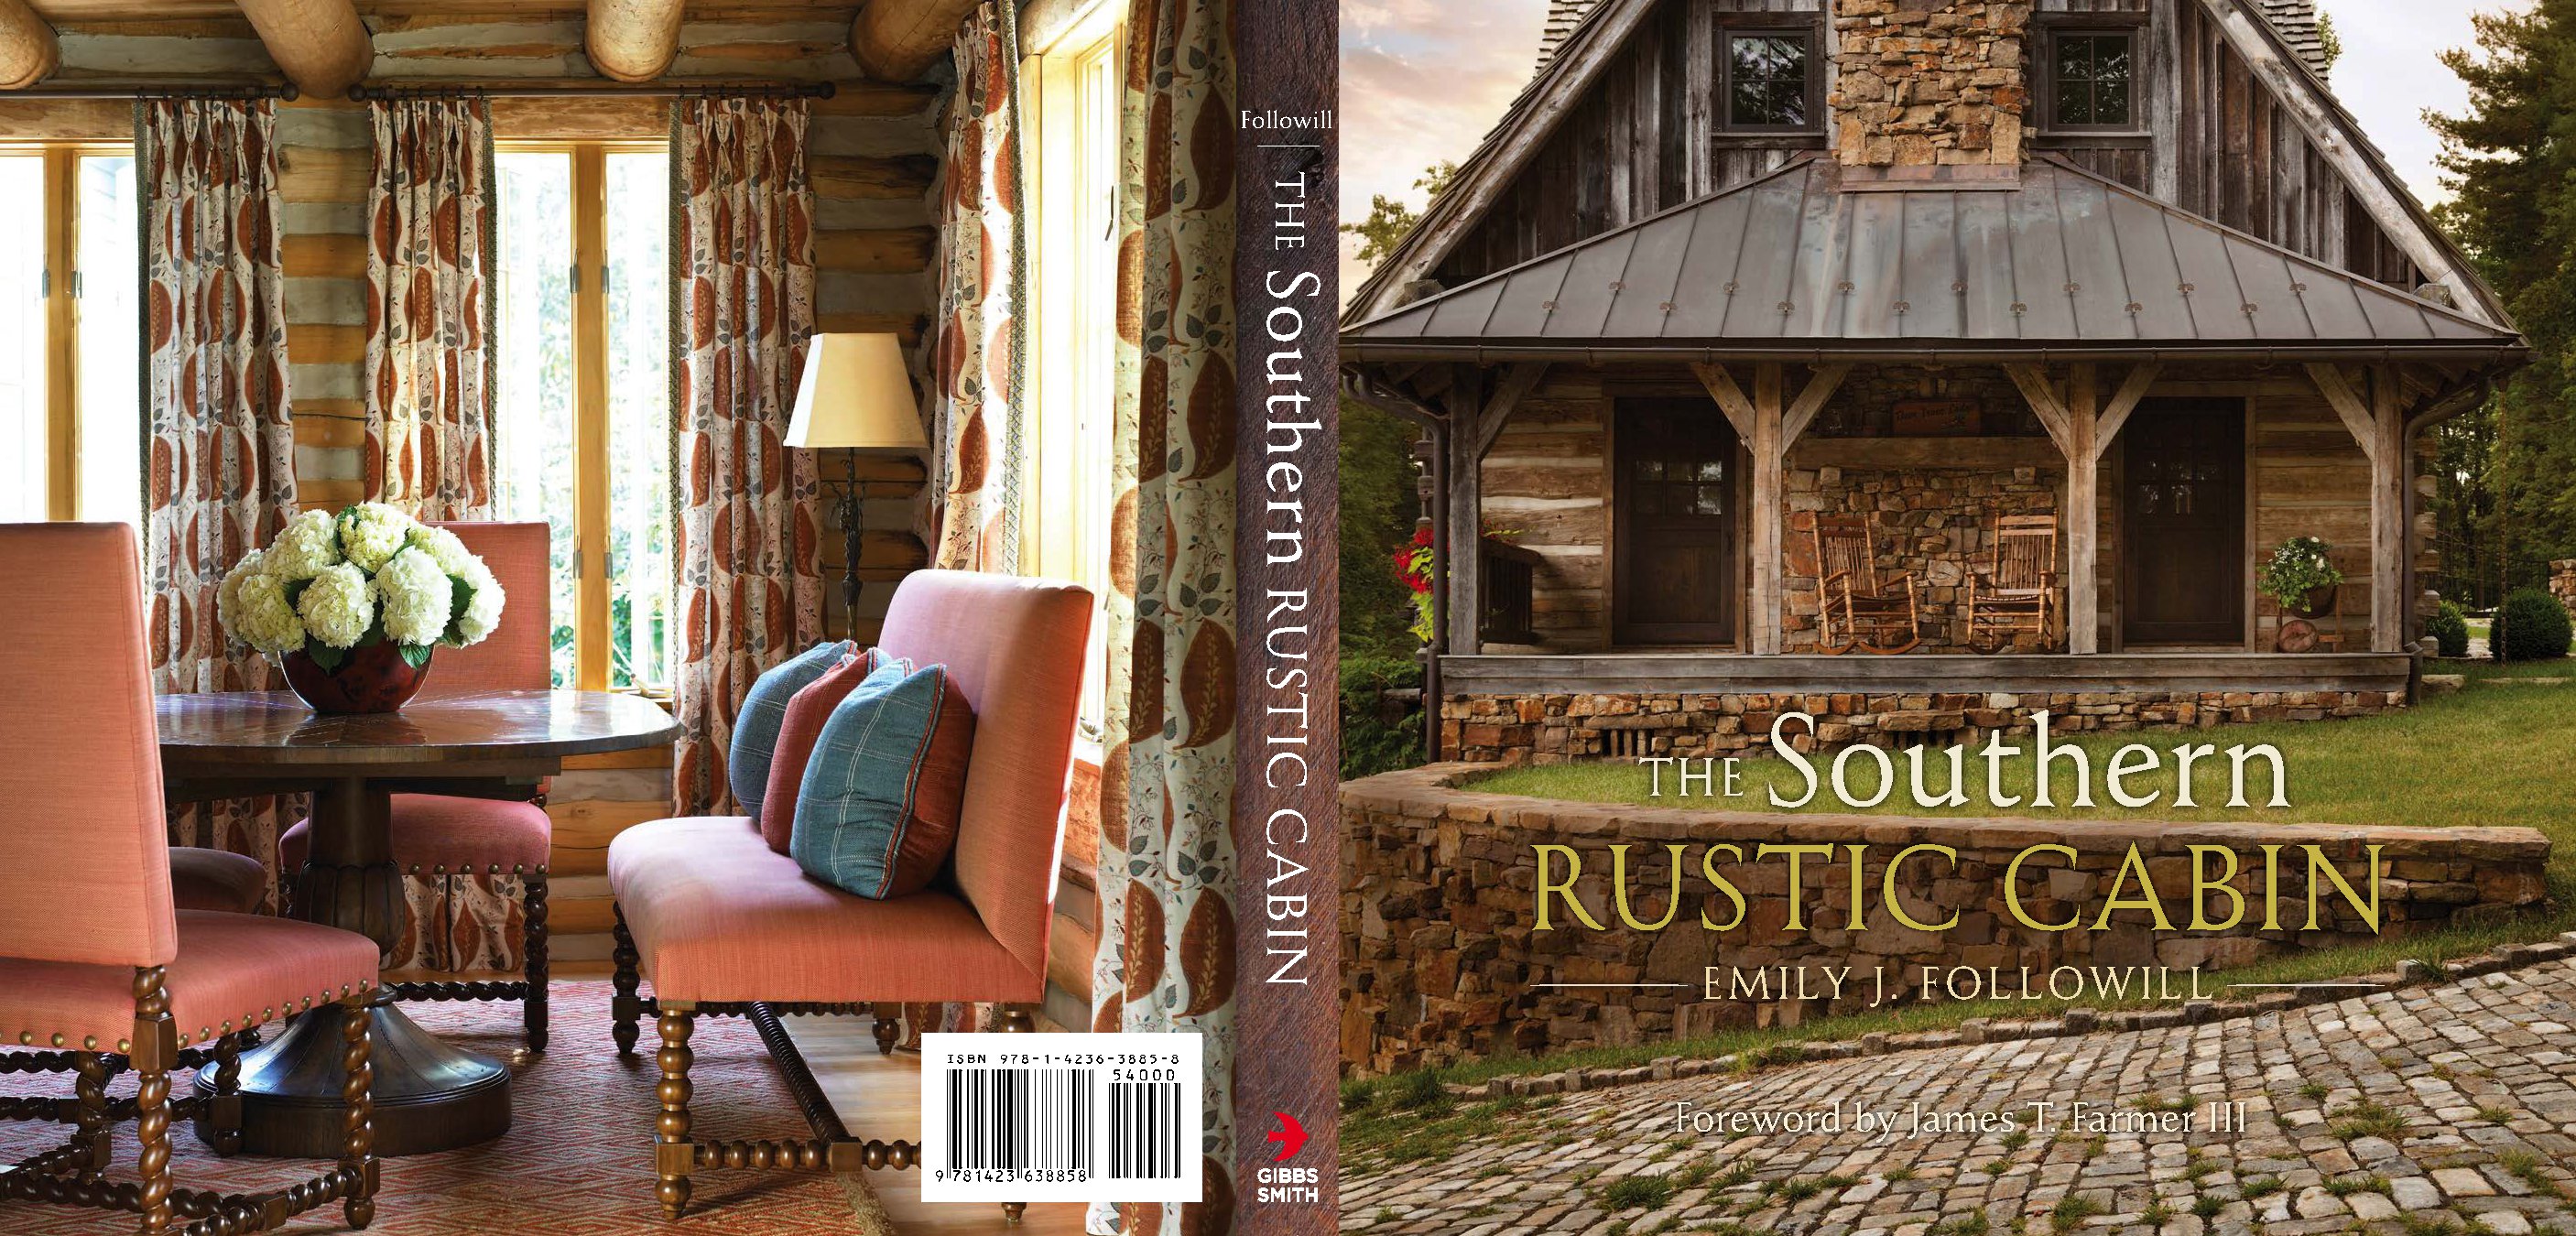 Southern Rustic Cabin